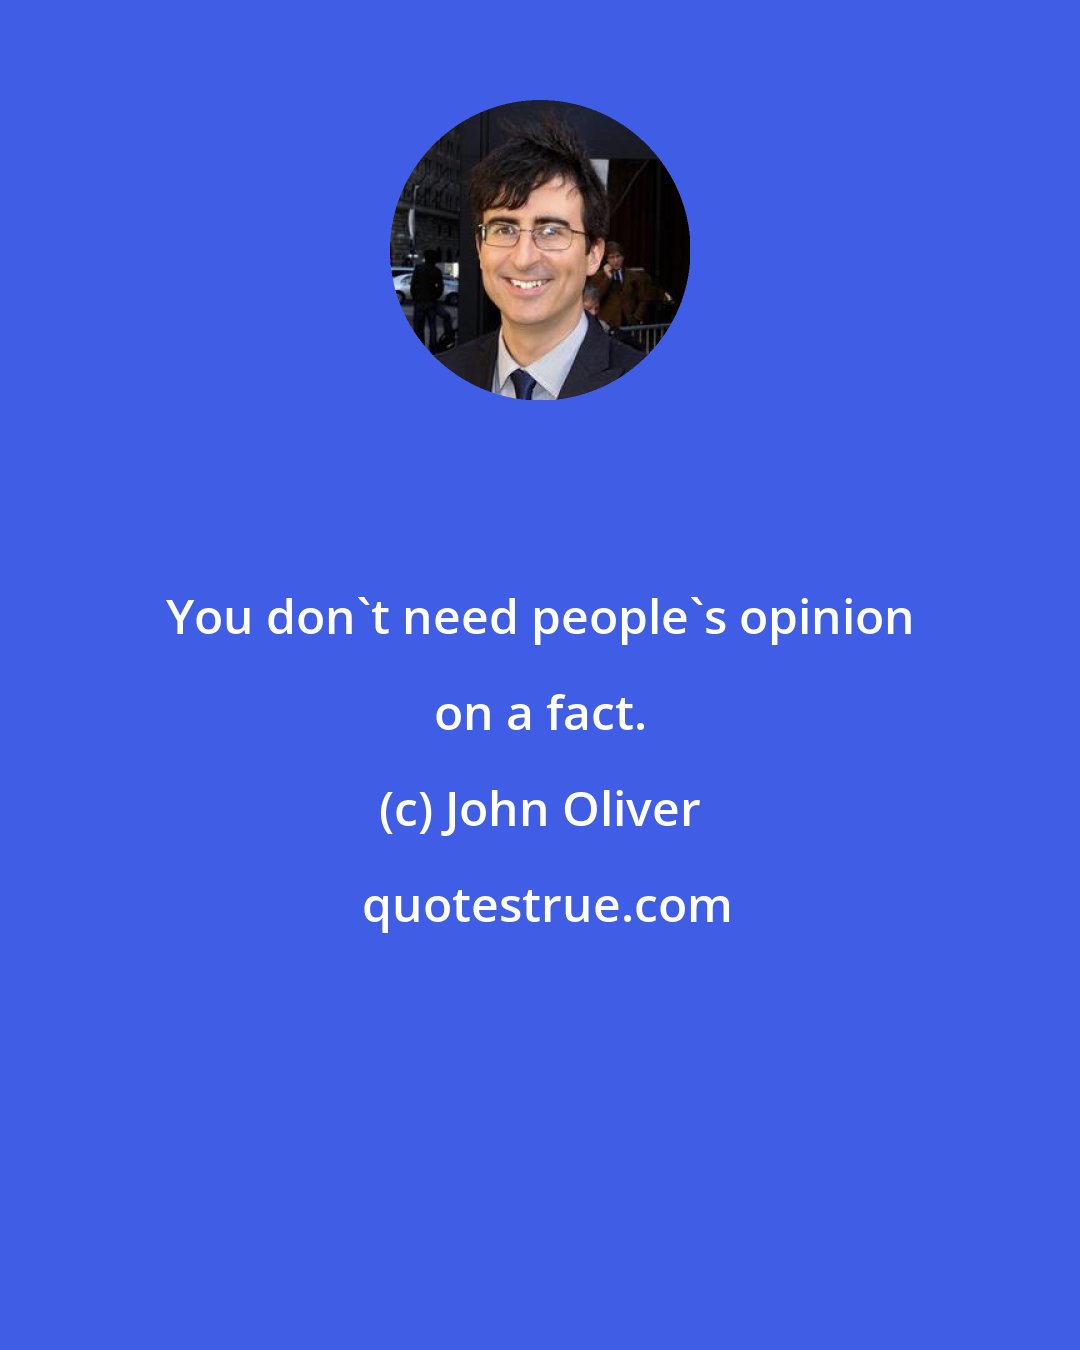 John Oliver: You don't need people's opinion on a fact.